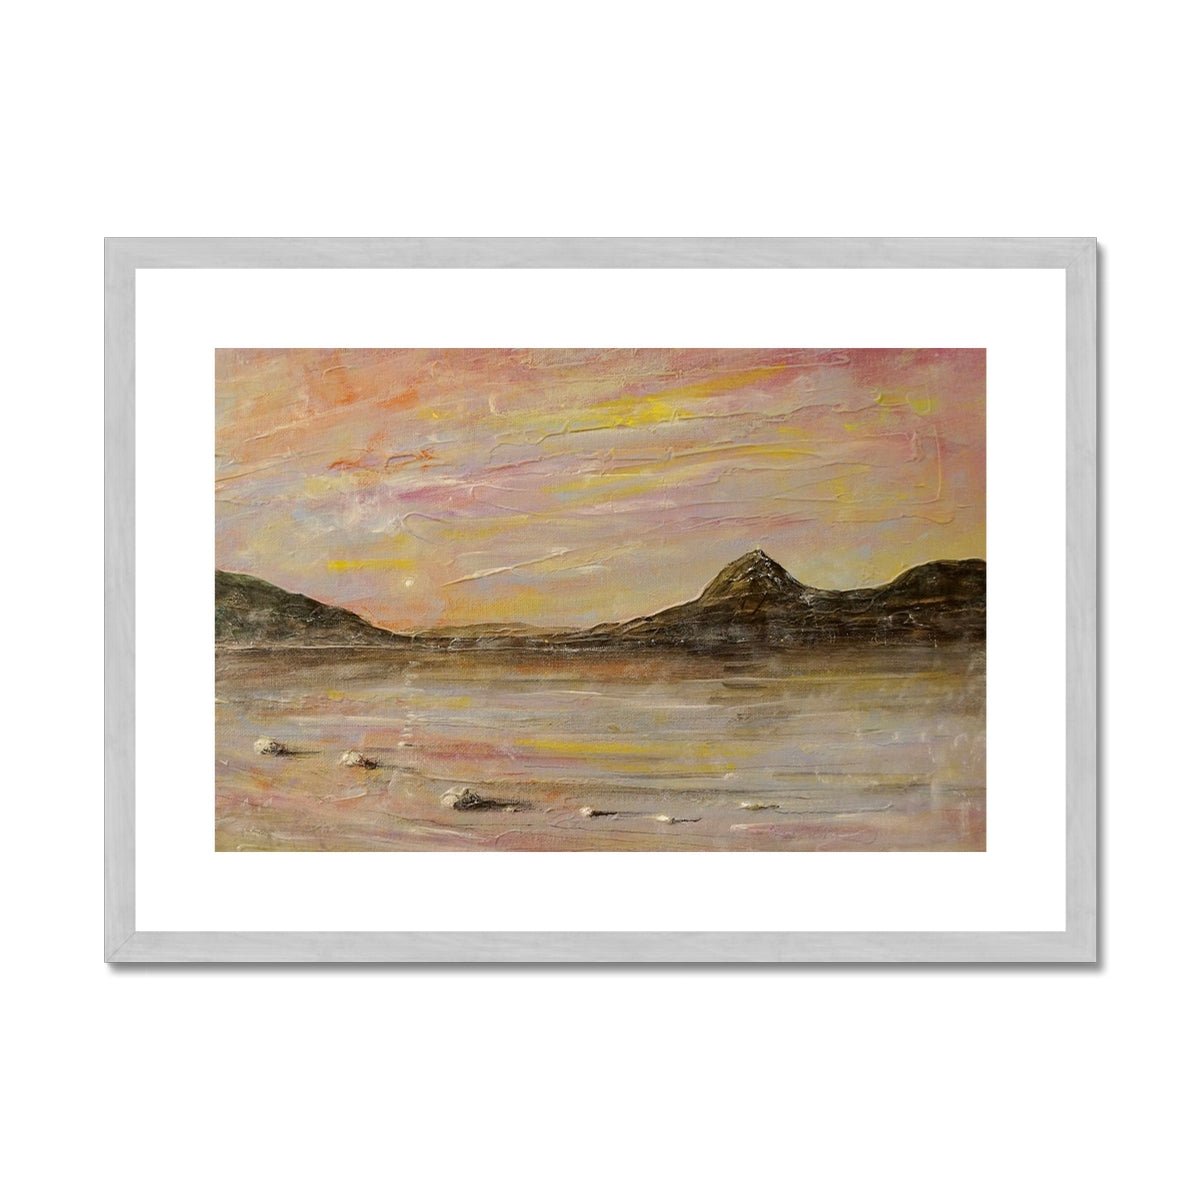 Loch Rannoch Dawn Painting | Antique Framed & Mounted Prints From Scotland-Antique Framed & Mounted Prints-Scottish Lochs & Mountains Art Gallery-A2 Landscape-Silver Frame-Paintings, Prints, Homeware, Art Gifts From Scotland By Scottish Artist Kevin Hunter